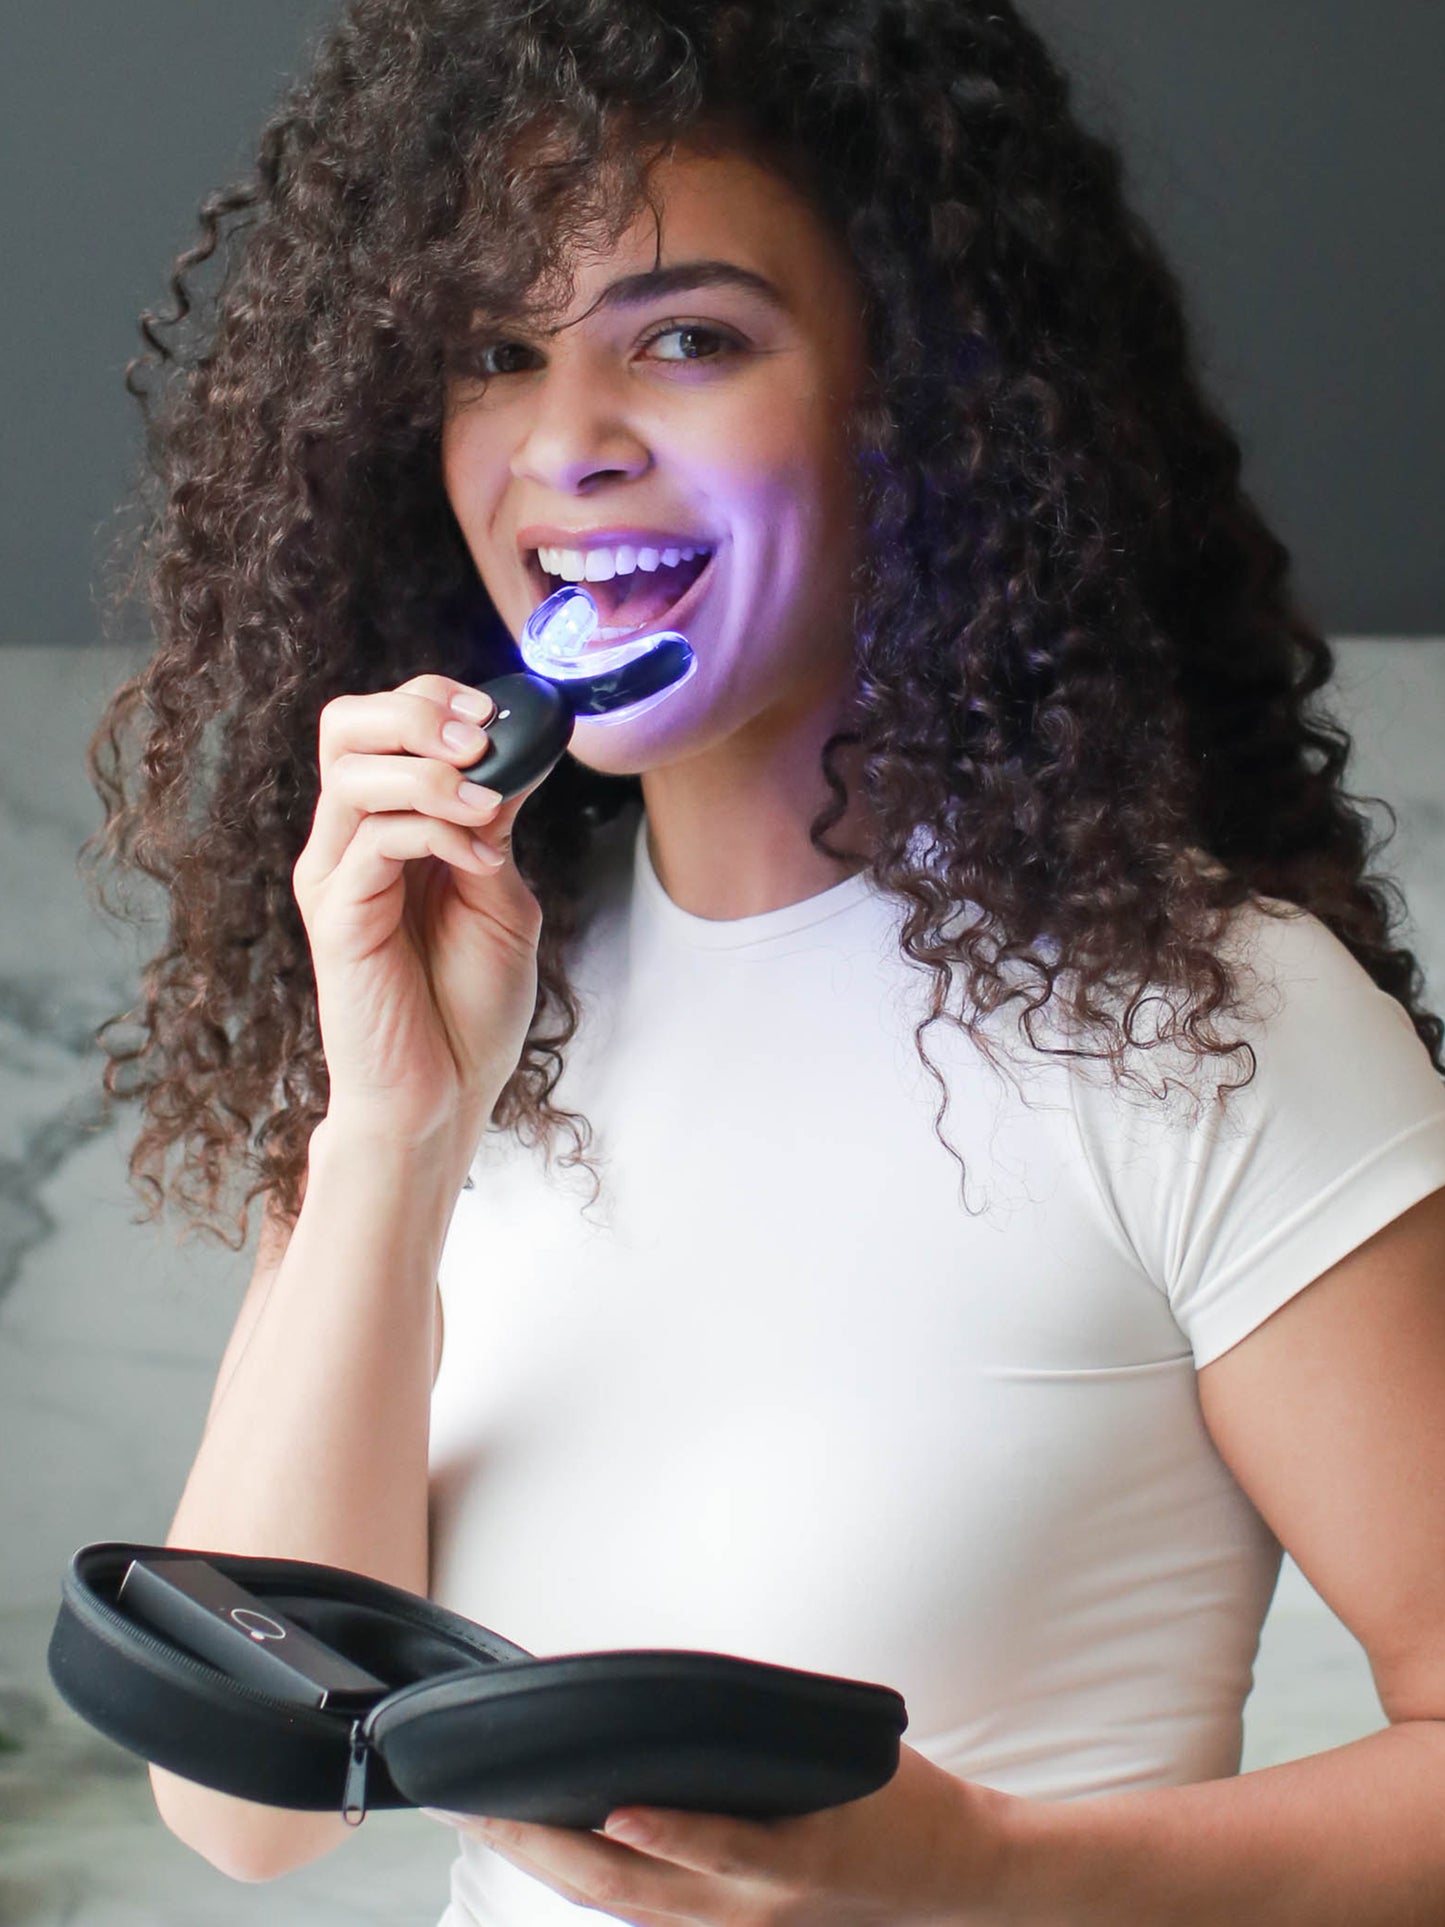 The Teeth Whitening Device